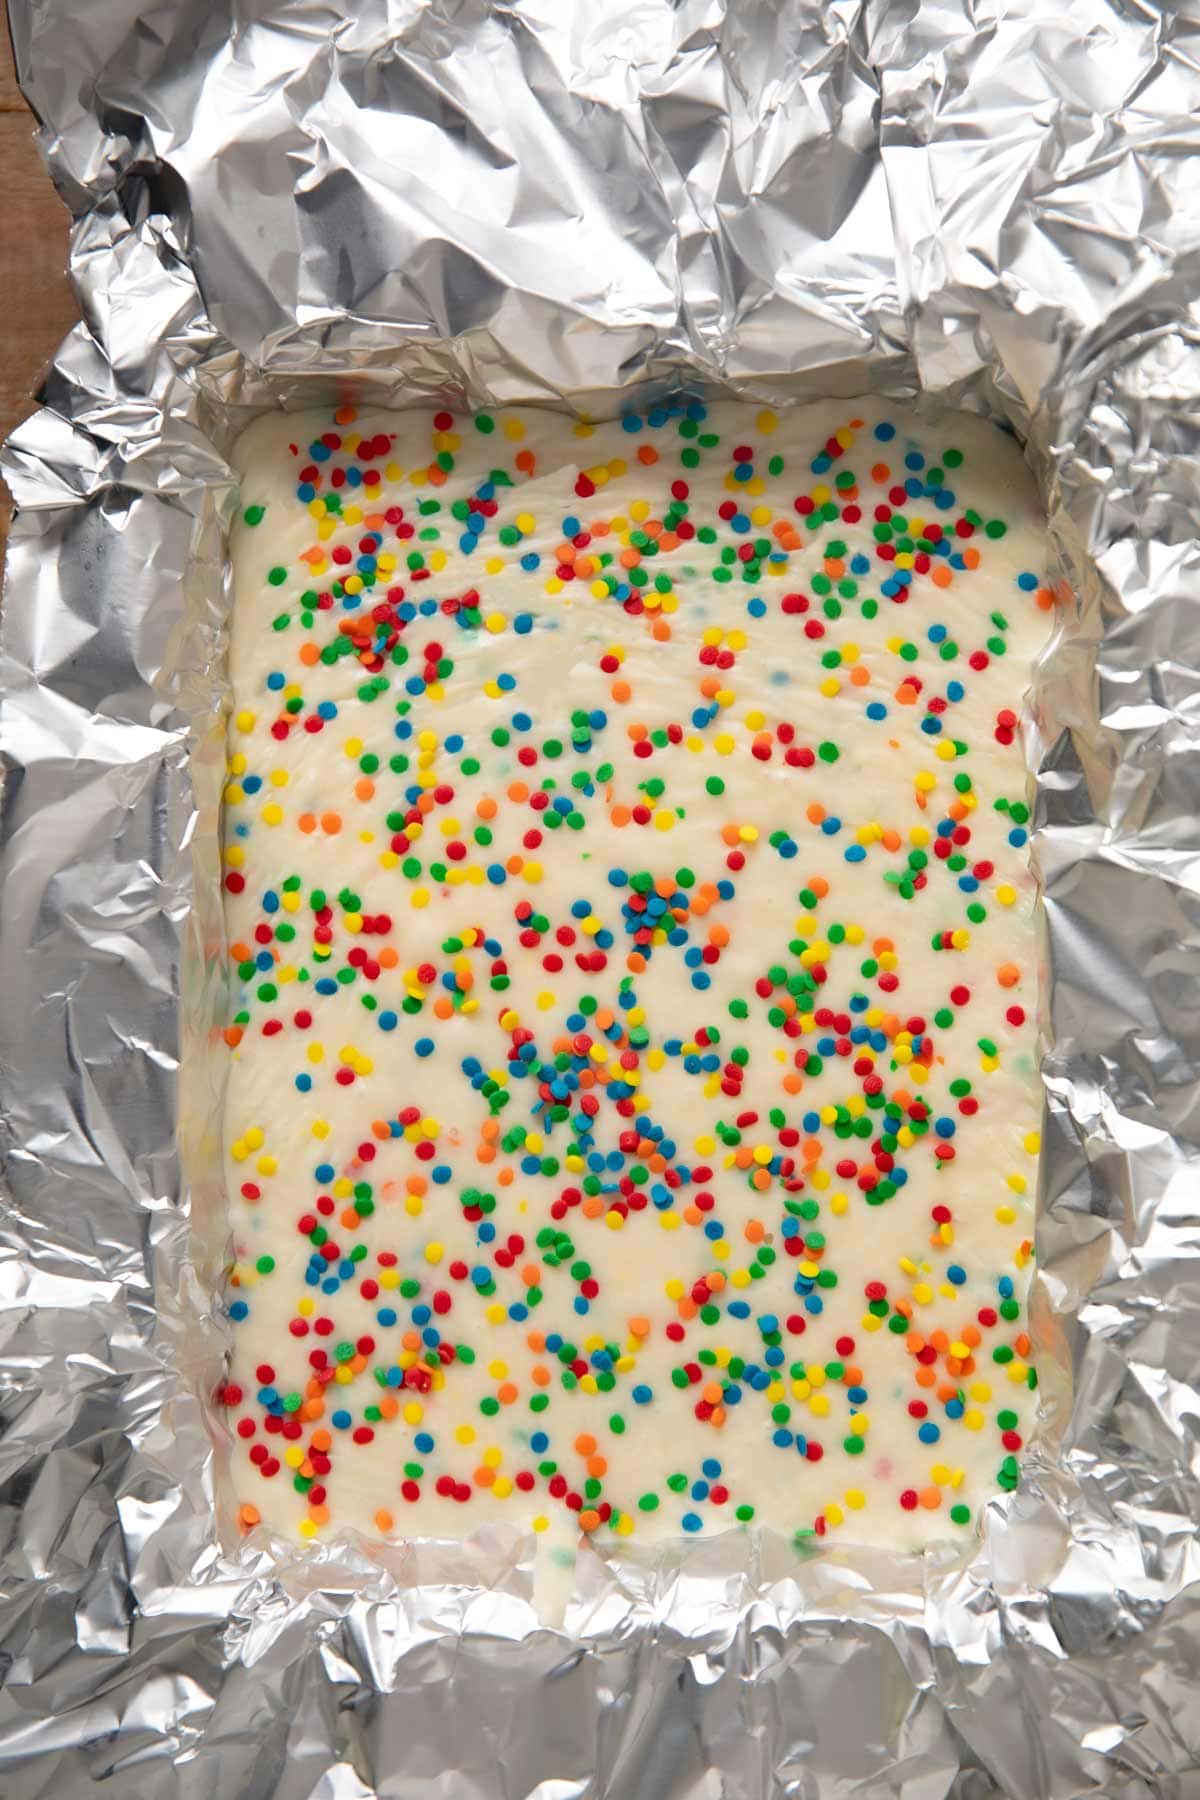 Tray of Birthday Cake Fudge lined with foil